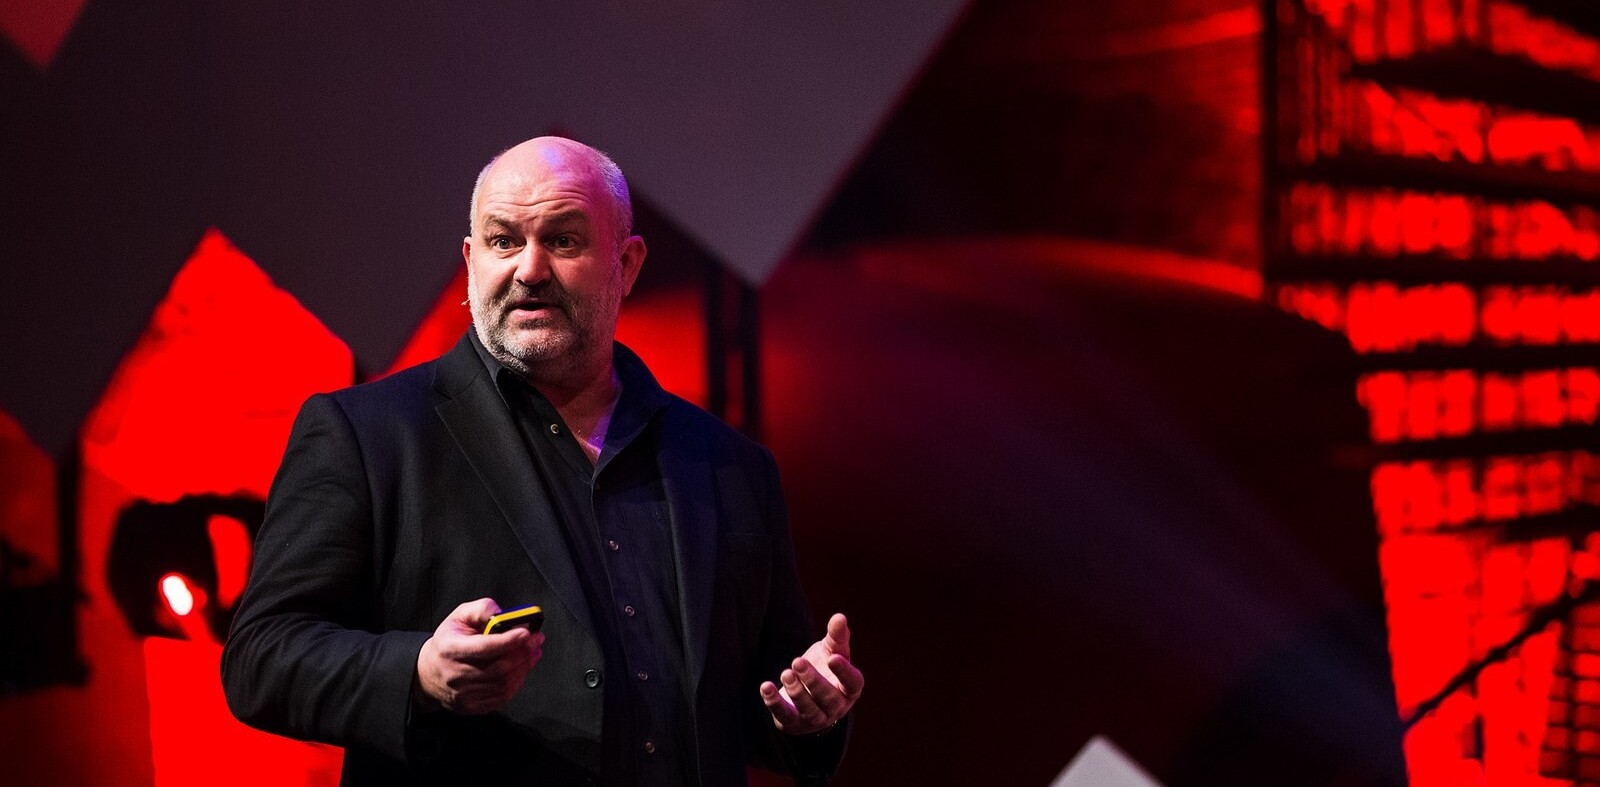 Two-pizza teams: Werner Vogels on Amazon’s secrets for innovation at TNW Europe Conference